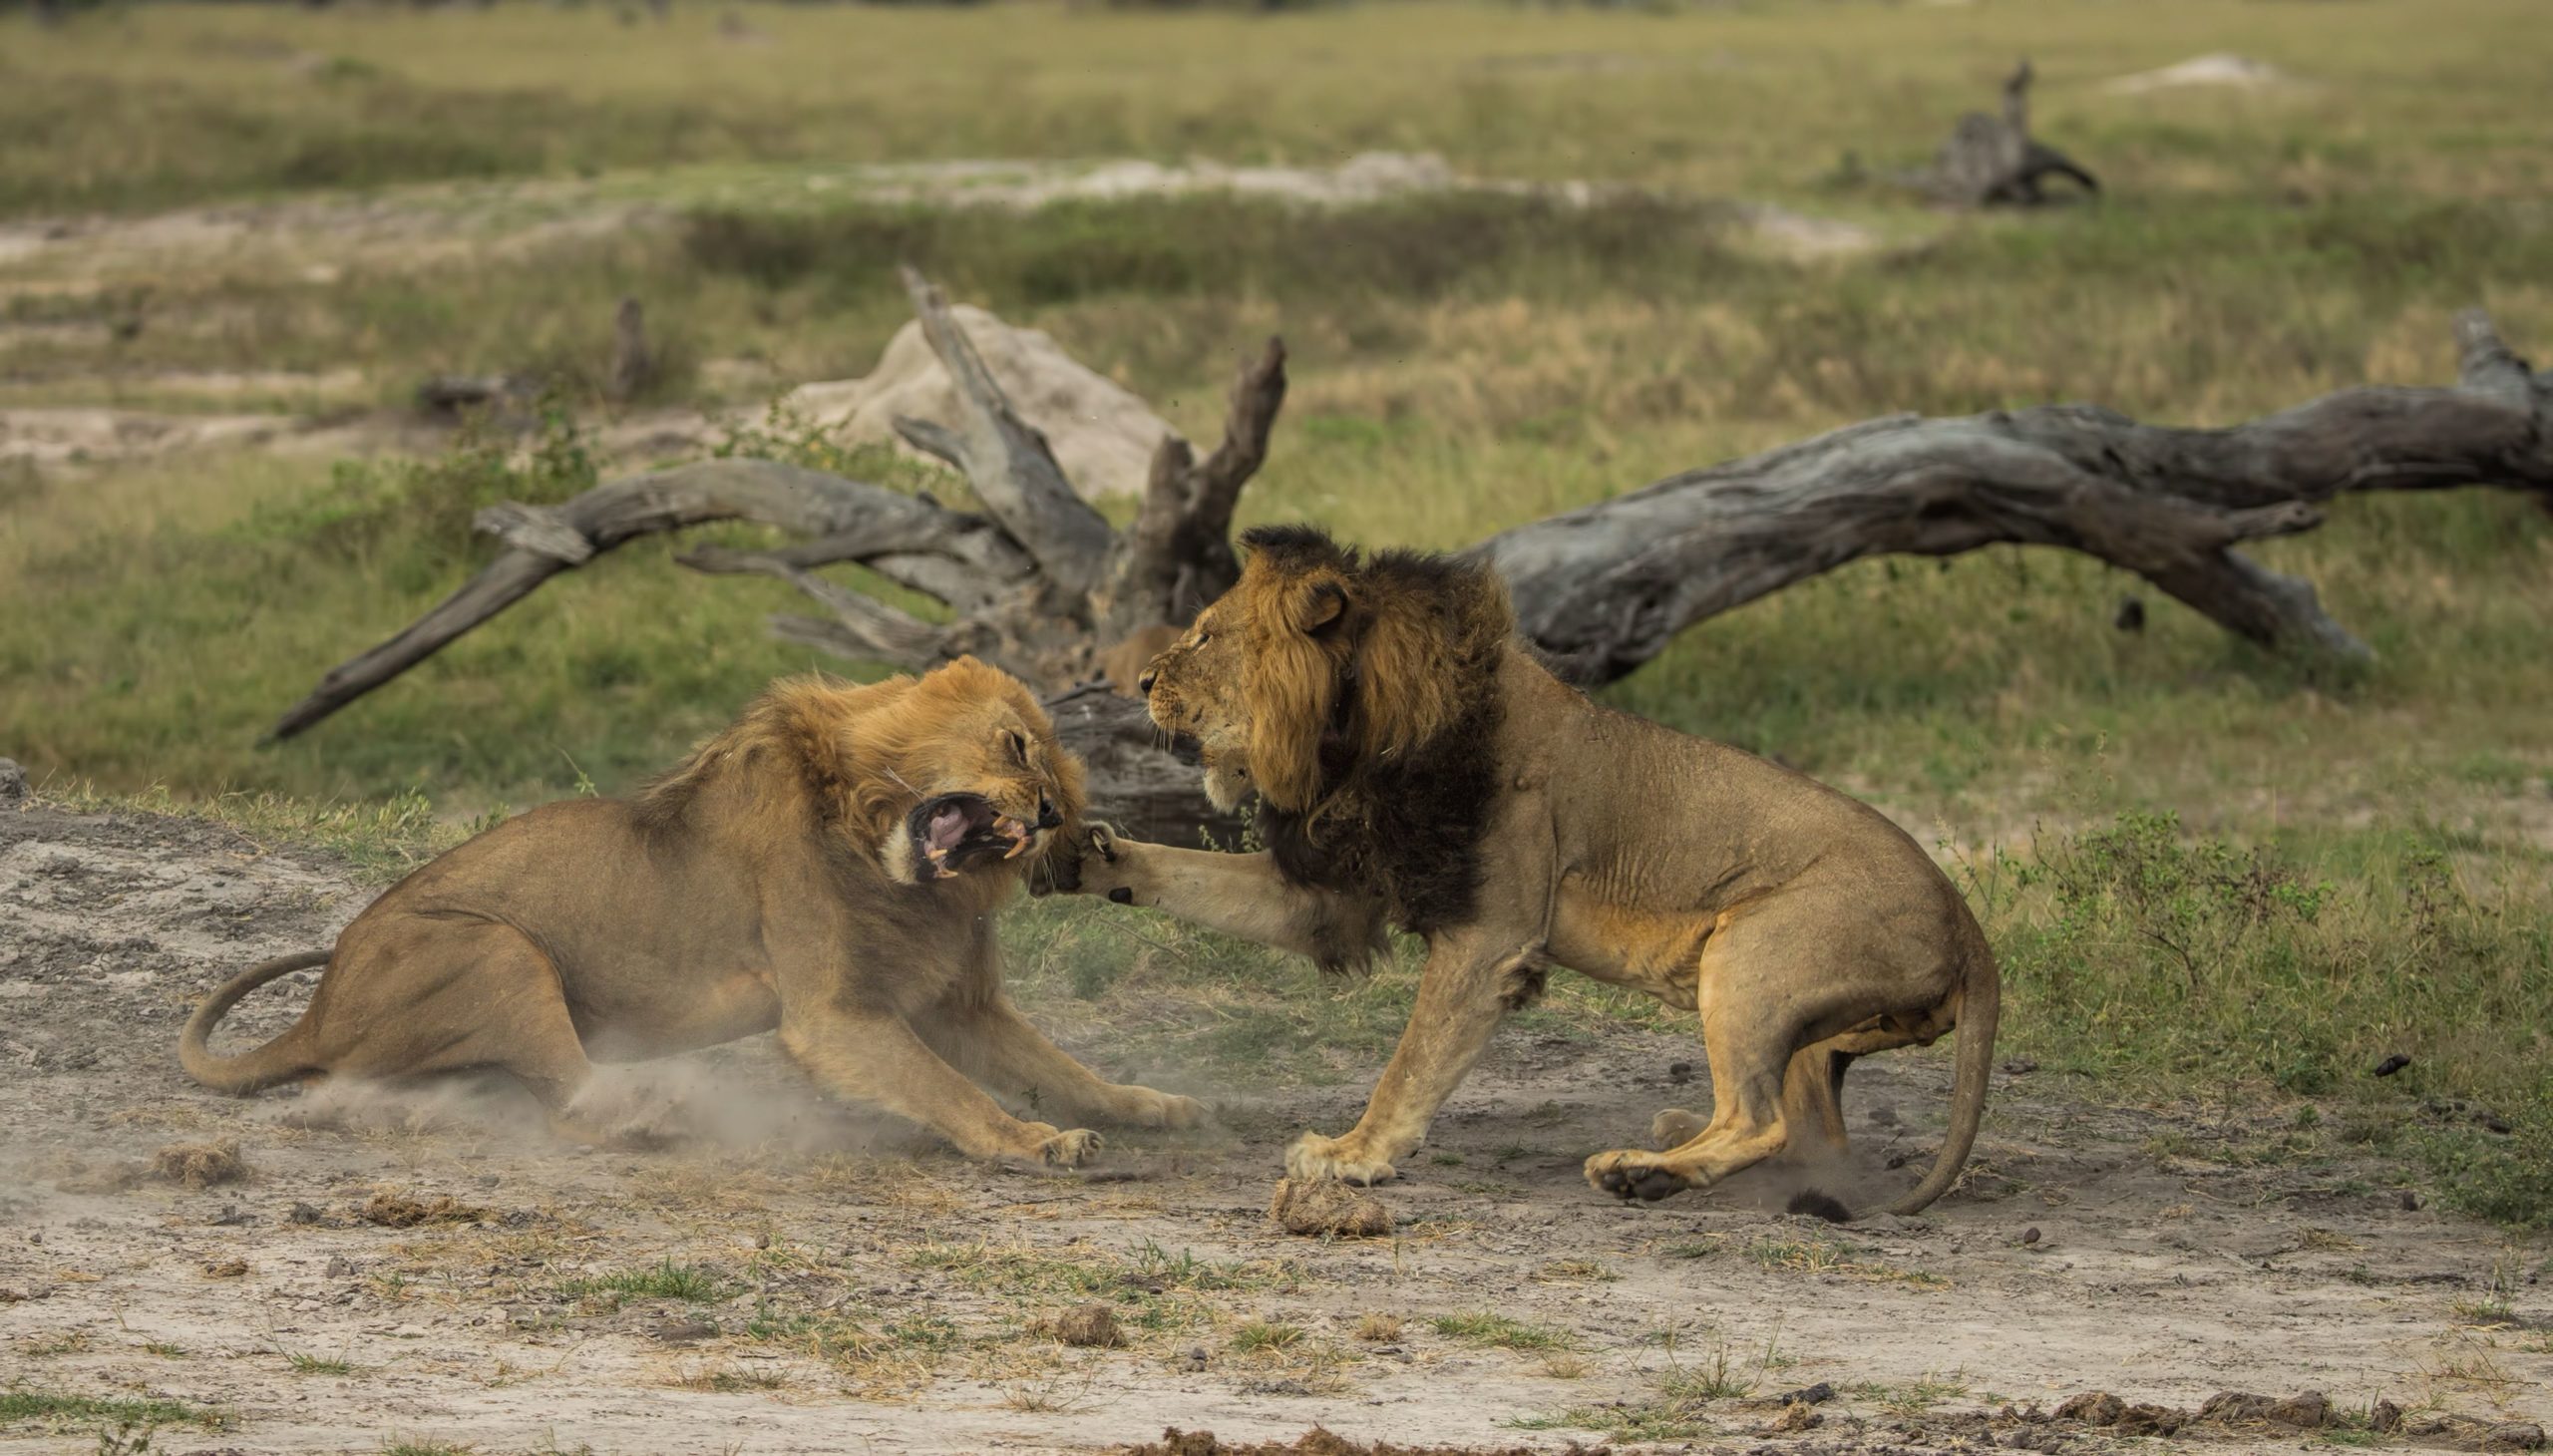 Cecil the lion fighting with another lion at the Hwange National Park, Zimbabwe, Africa - May 2014